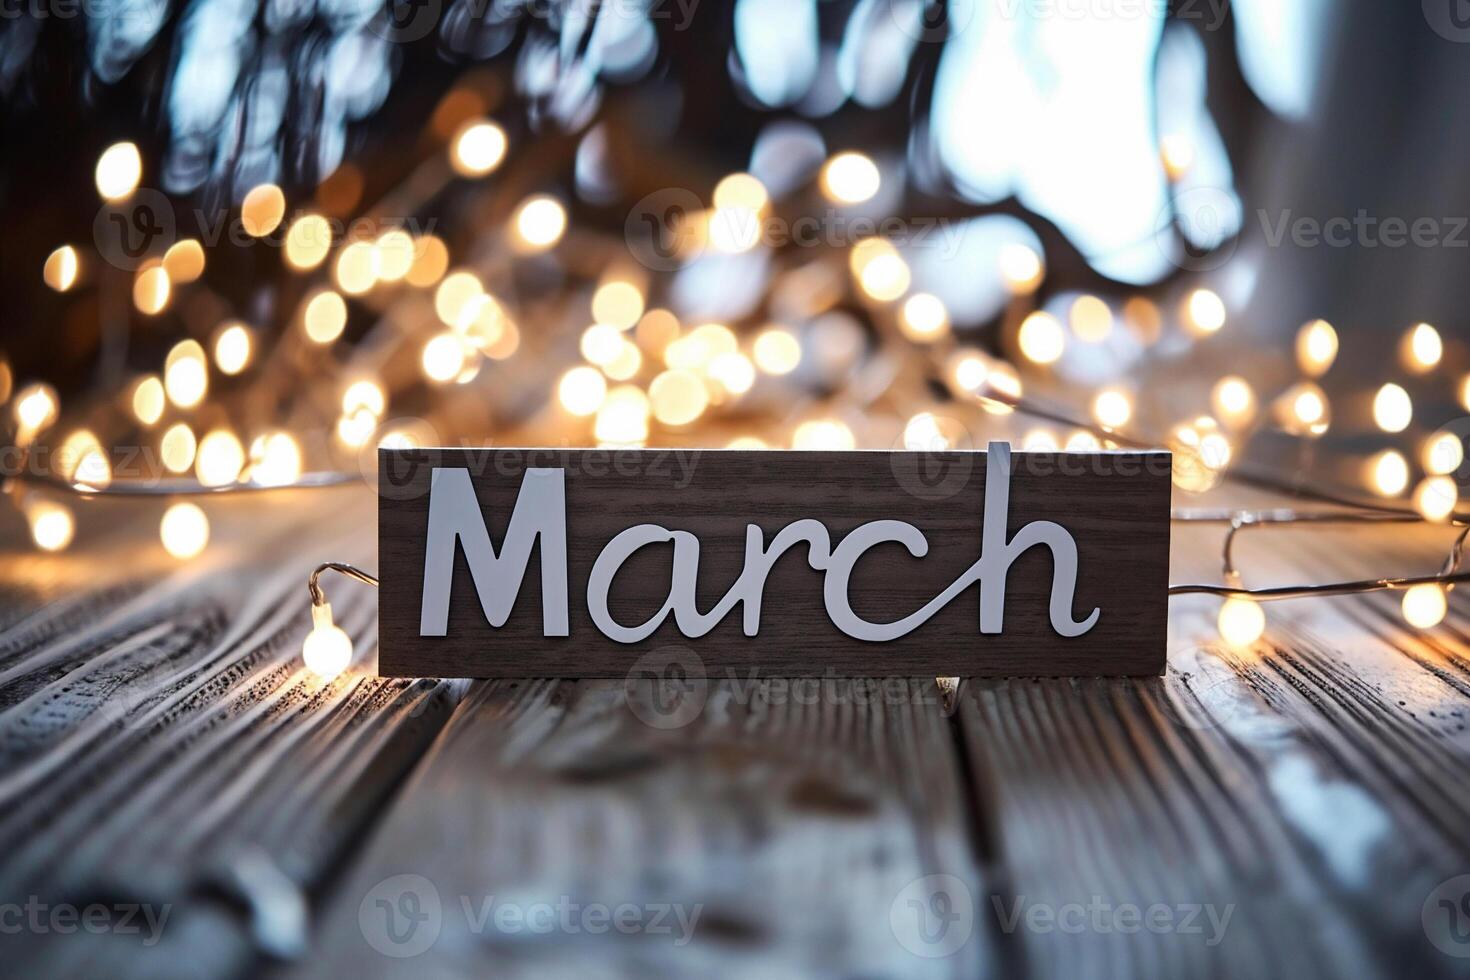 AI generated MARCH word on wooden sign board with bokeh lights on background photo